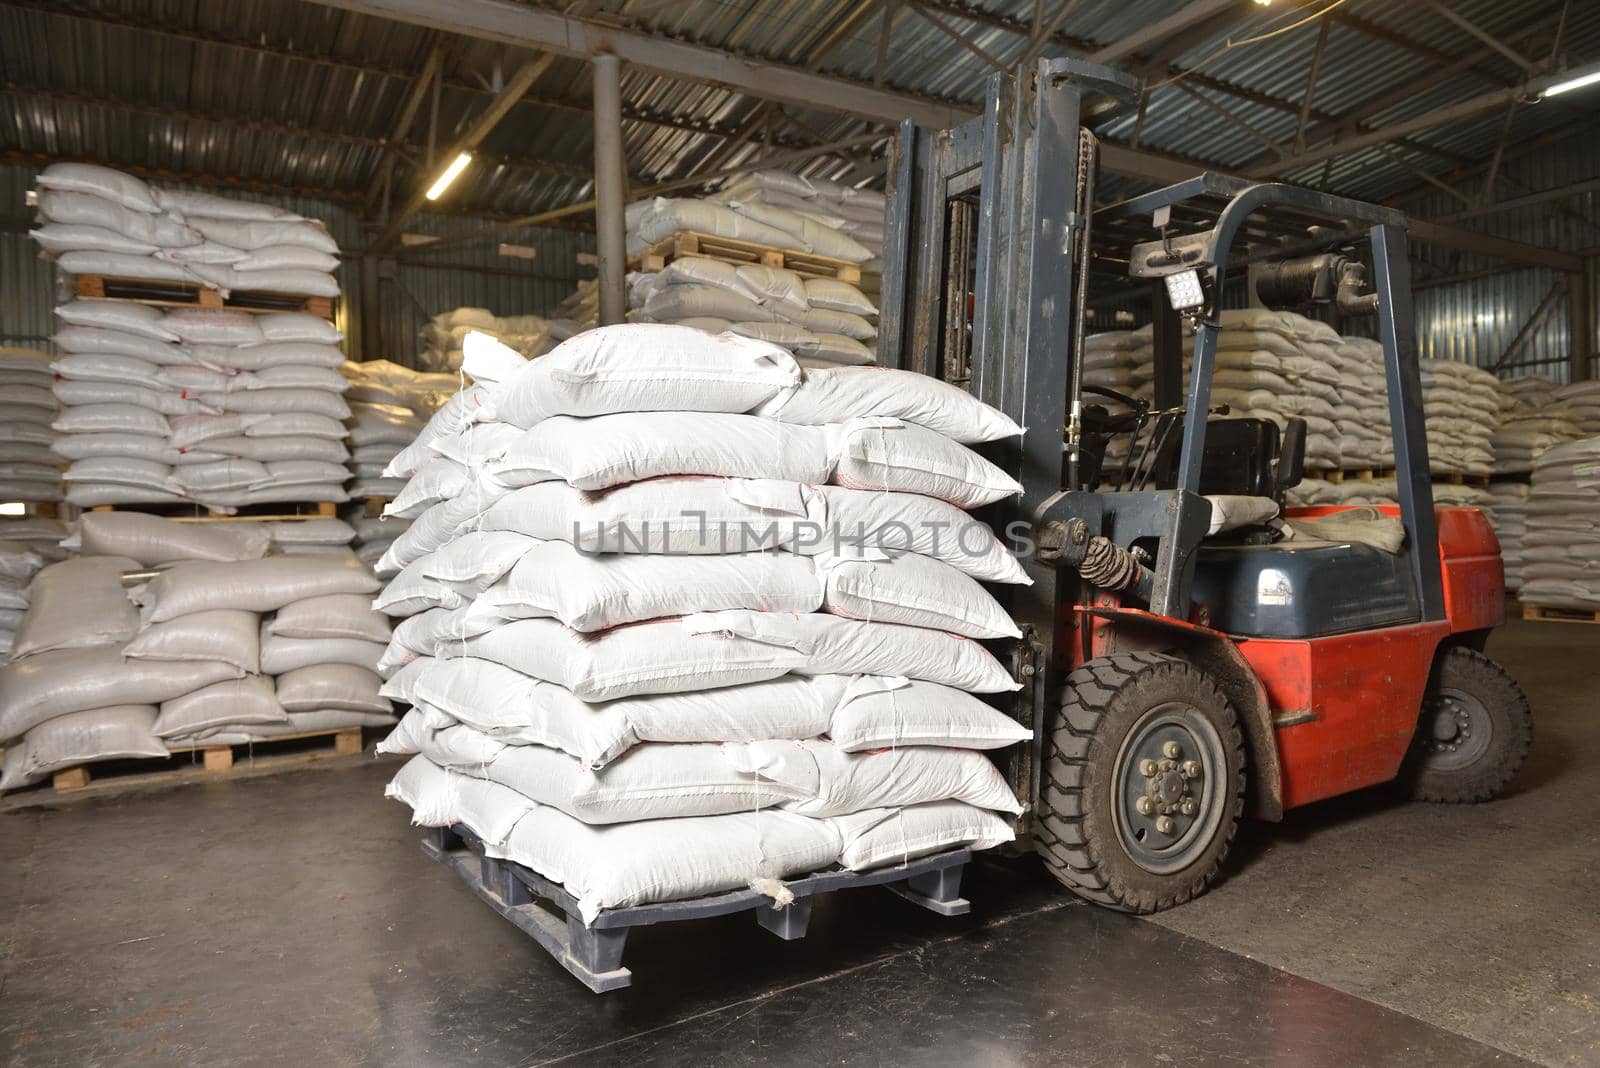 Forklift in a warehouse with wheat in sacks.